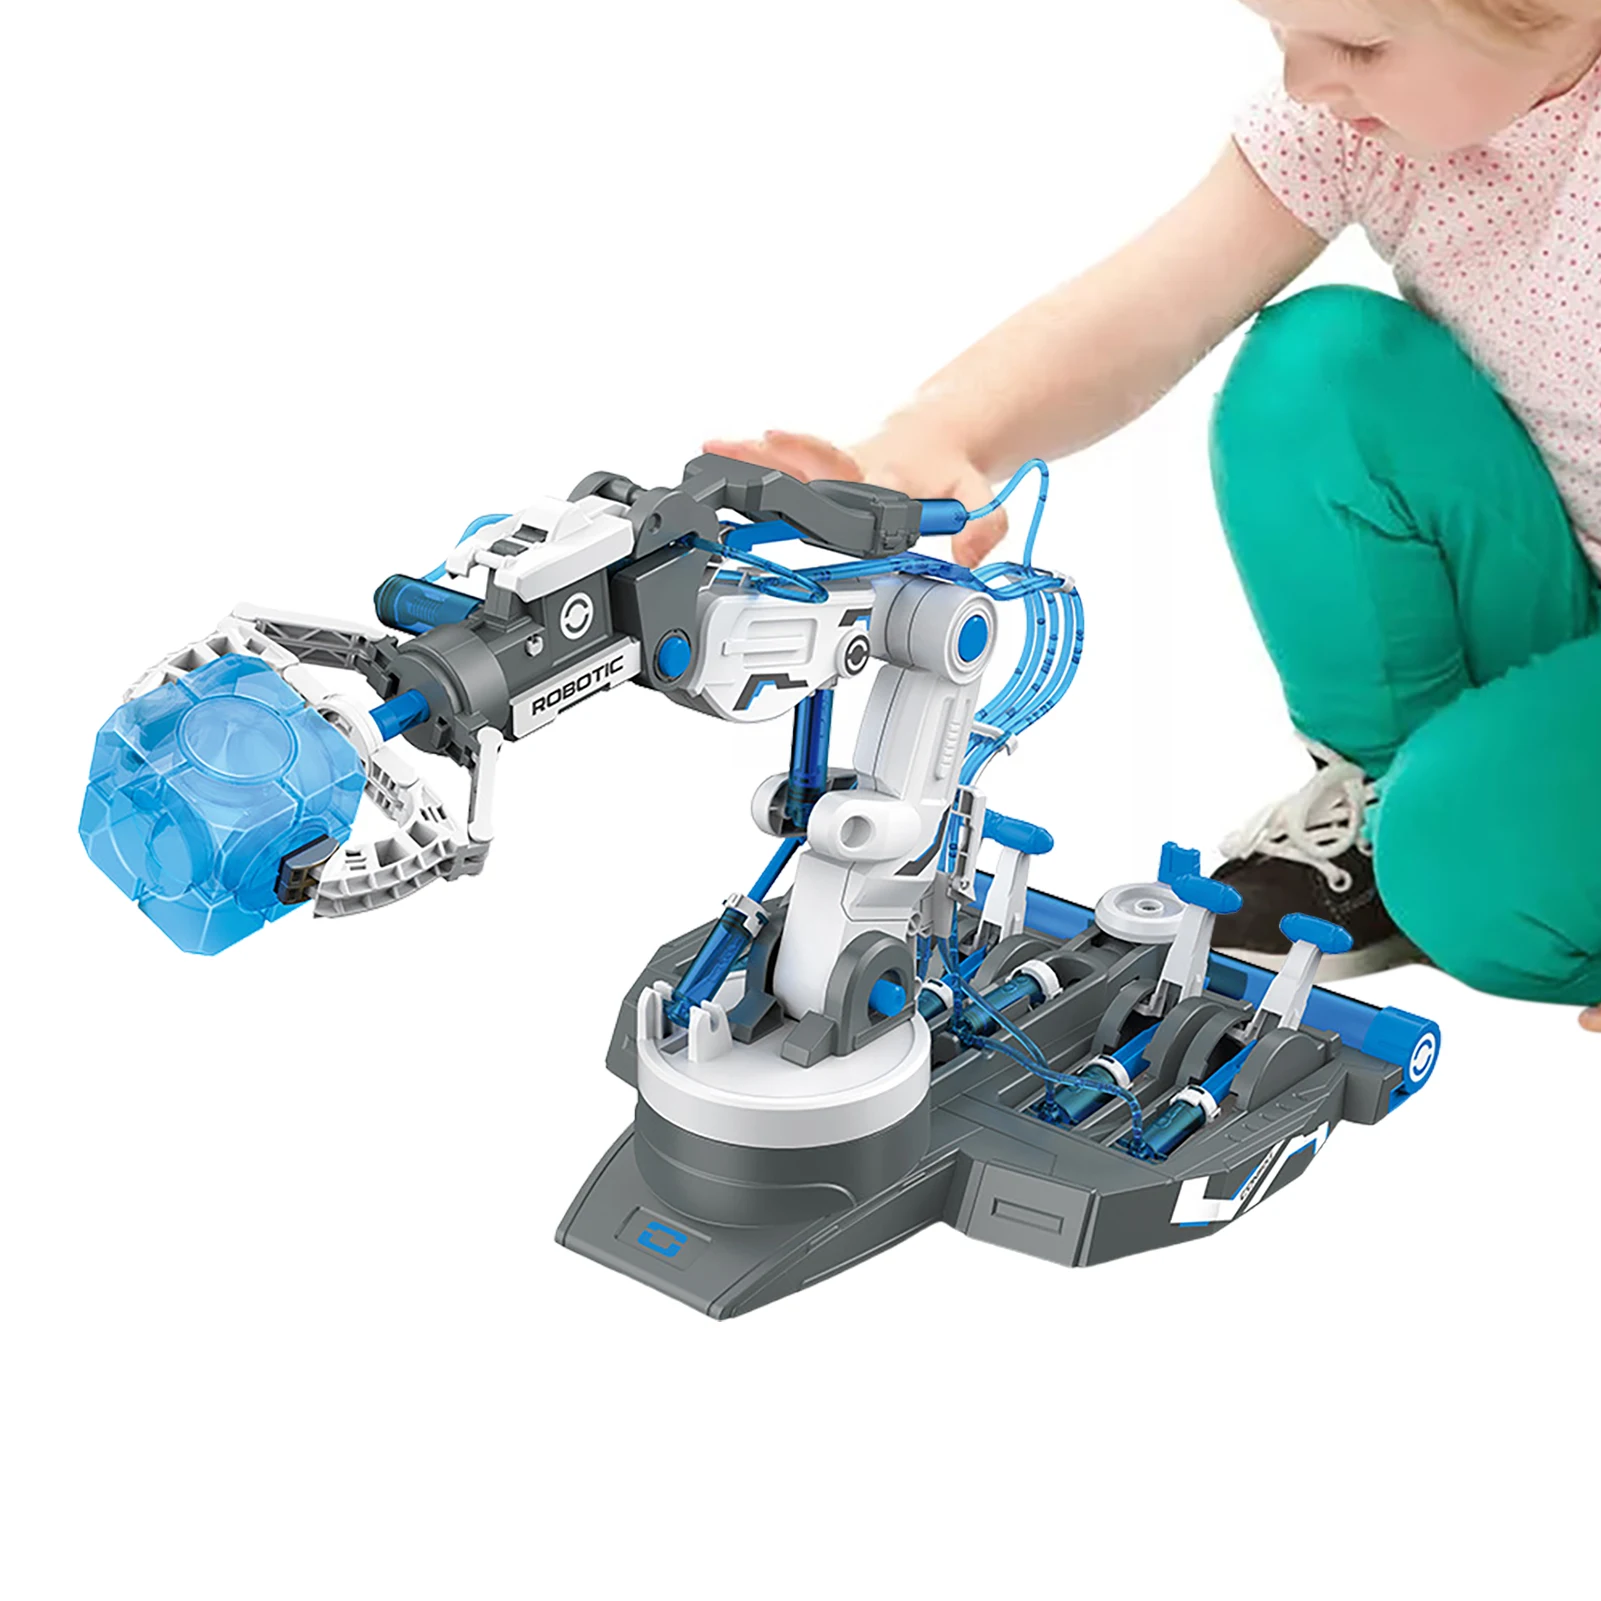 

Hydraulic Robot Mechanical Arm DIY Assembled Explore Kids Science Experiment Engineering Educational Toys Set For Children